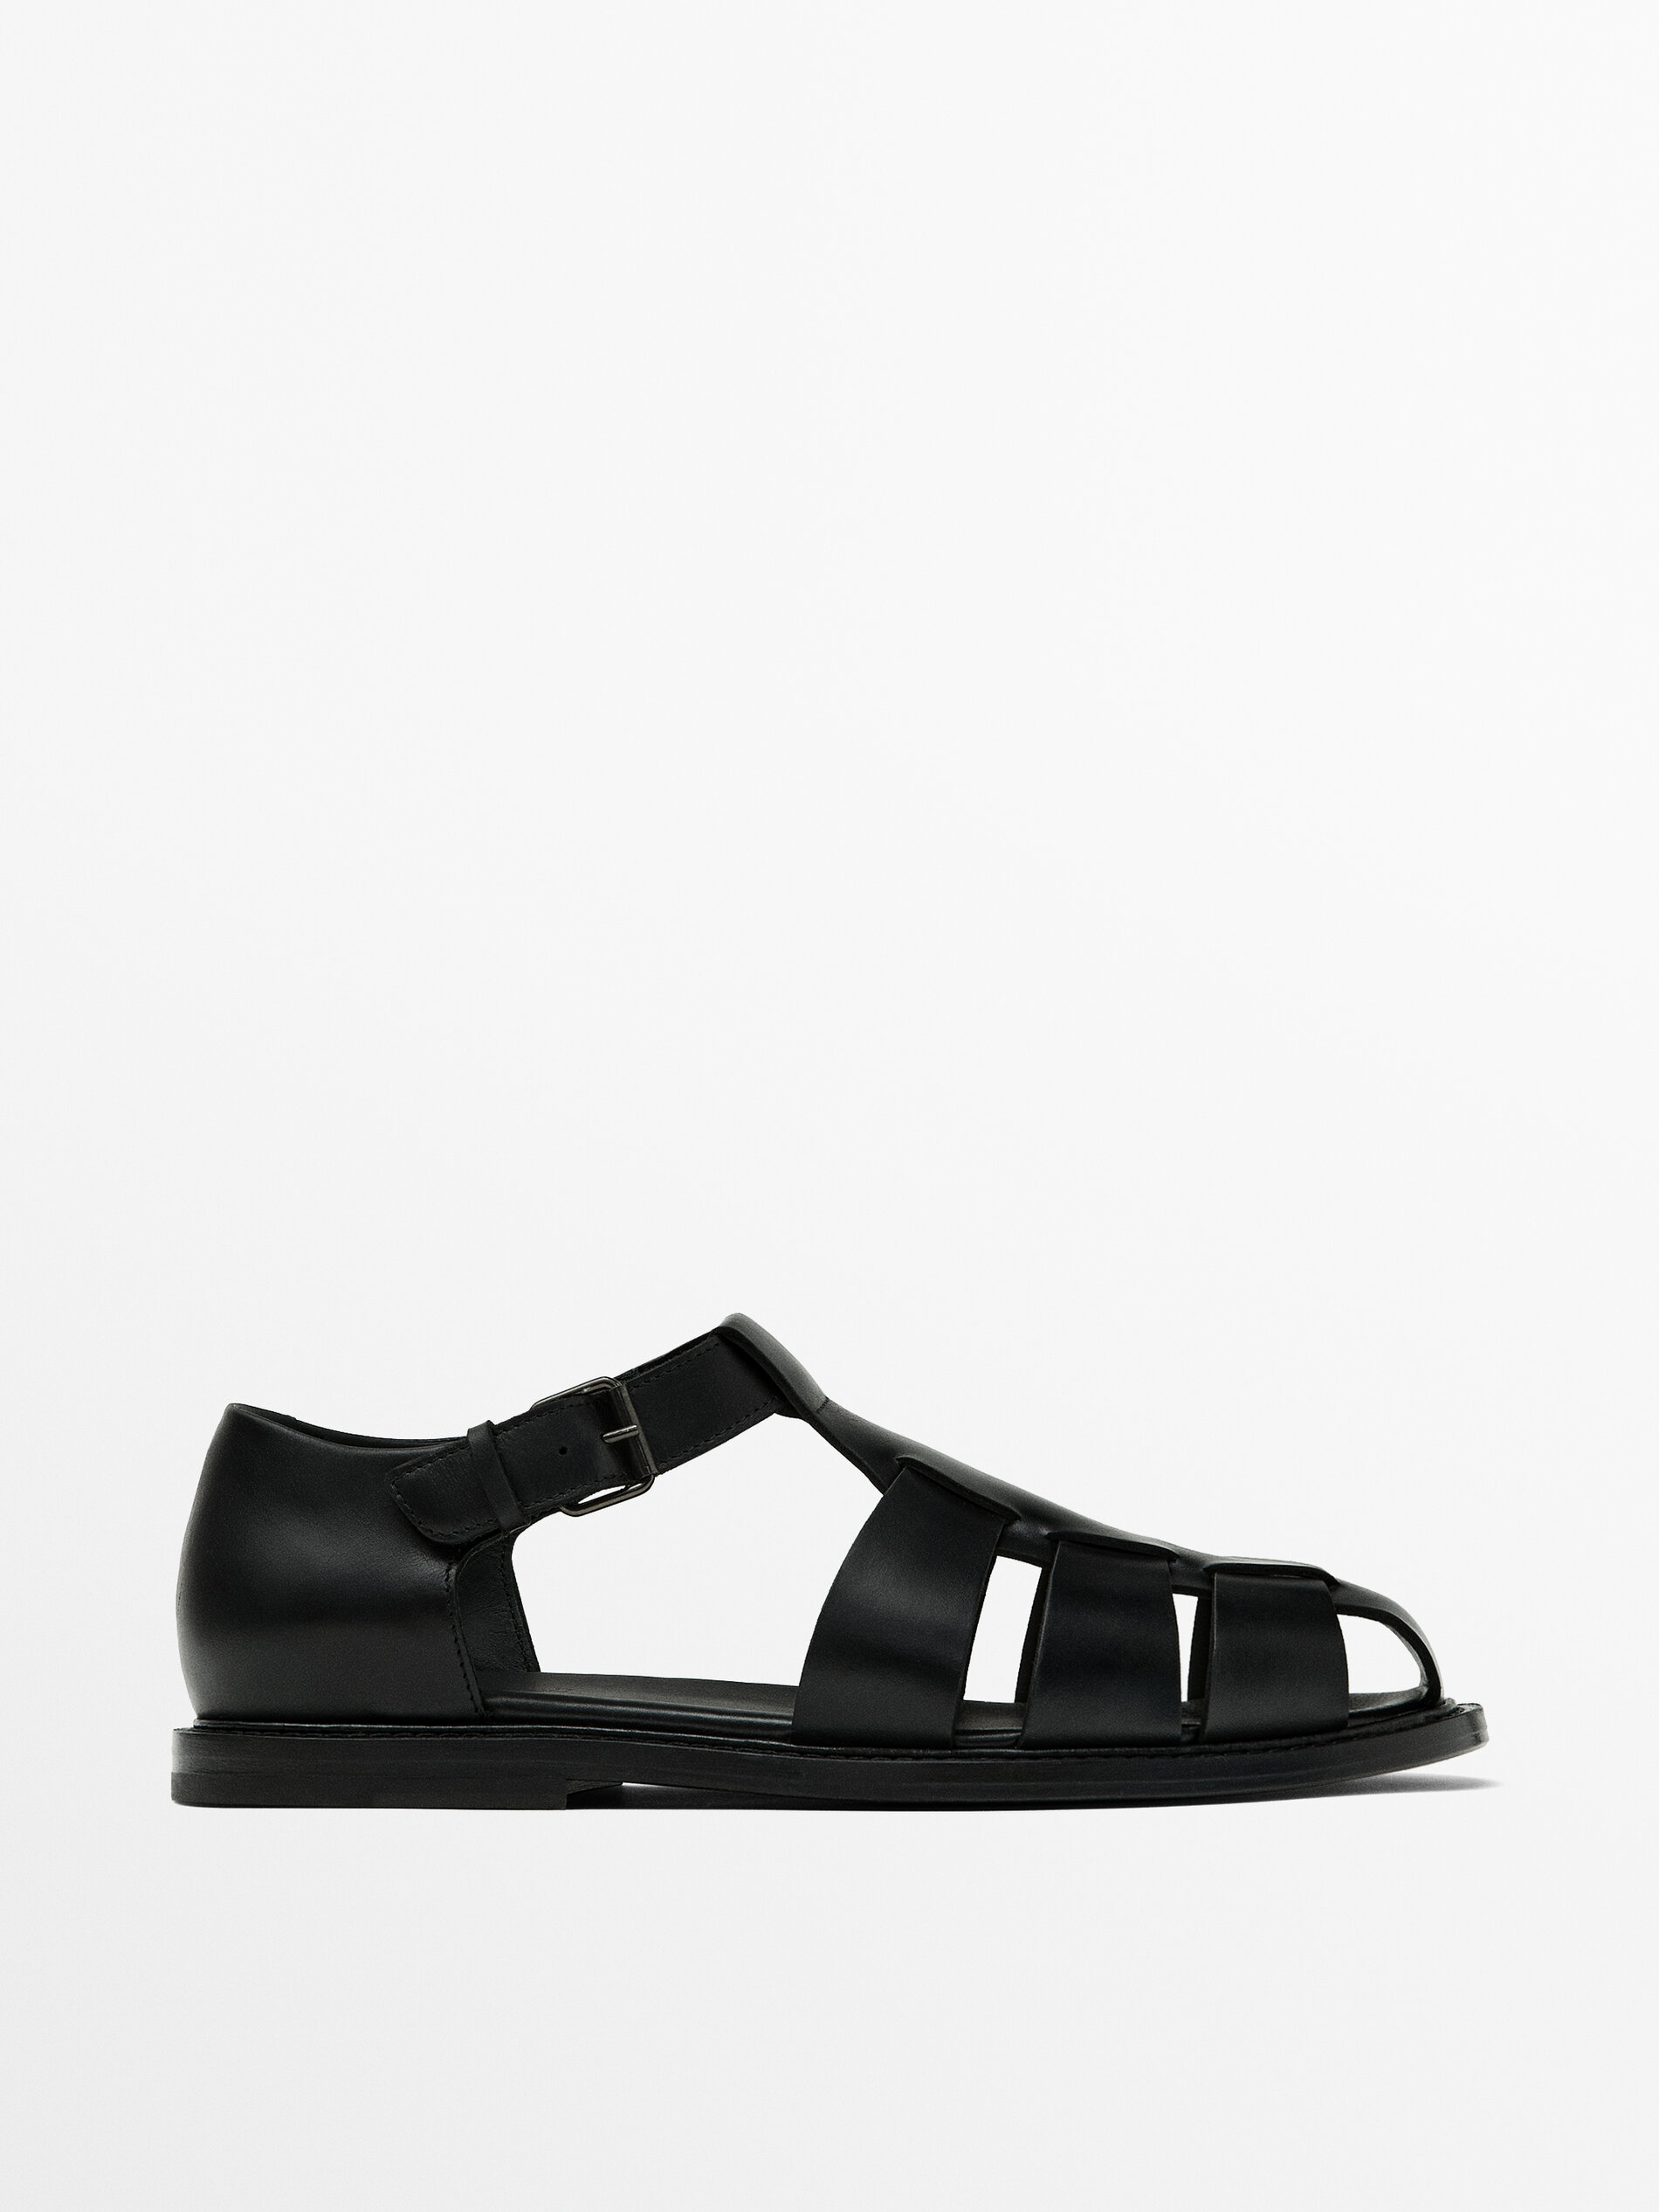 BLACK LEATHER CAGE SANDALS - LIMITED EDITION